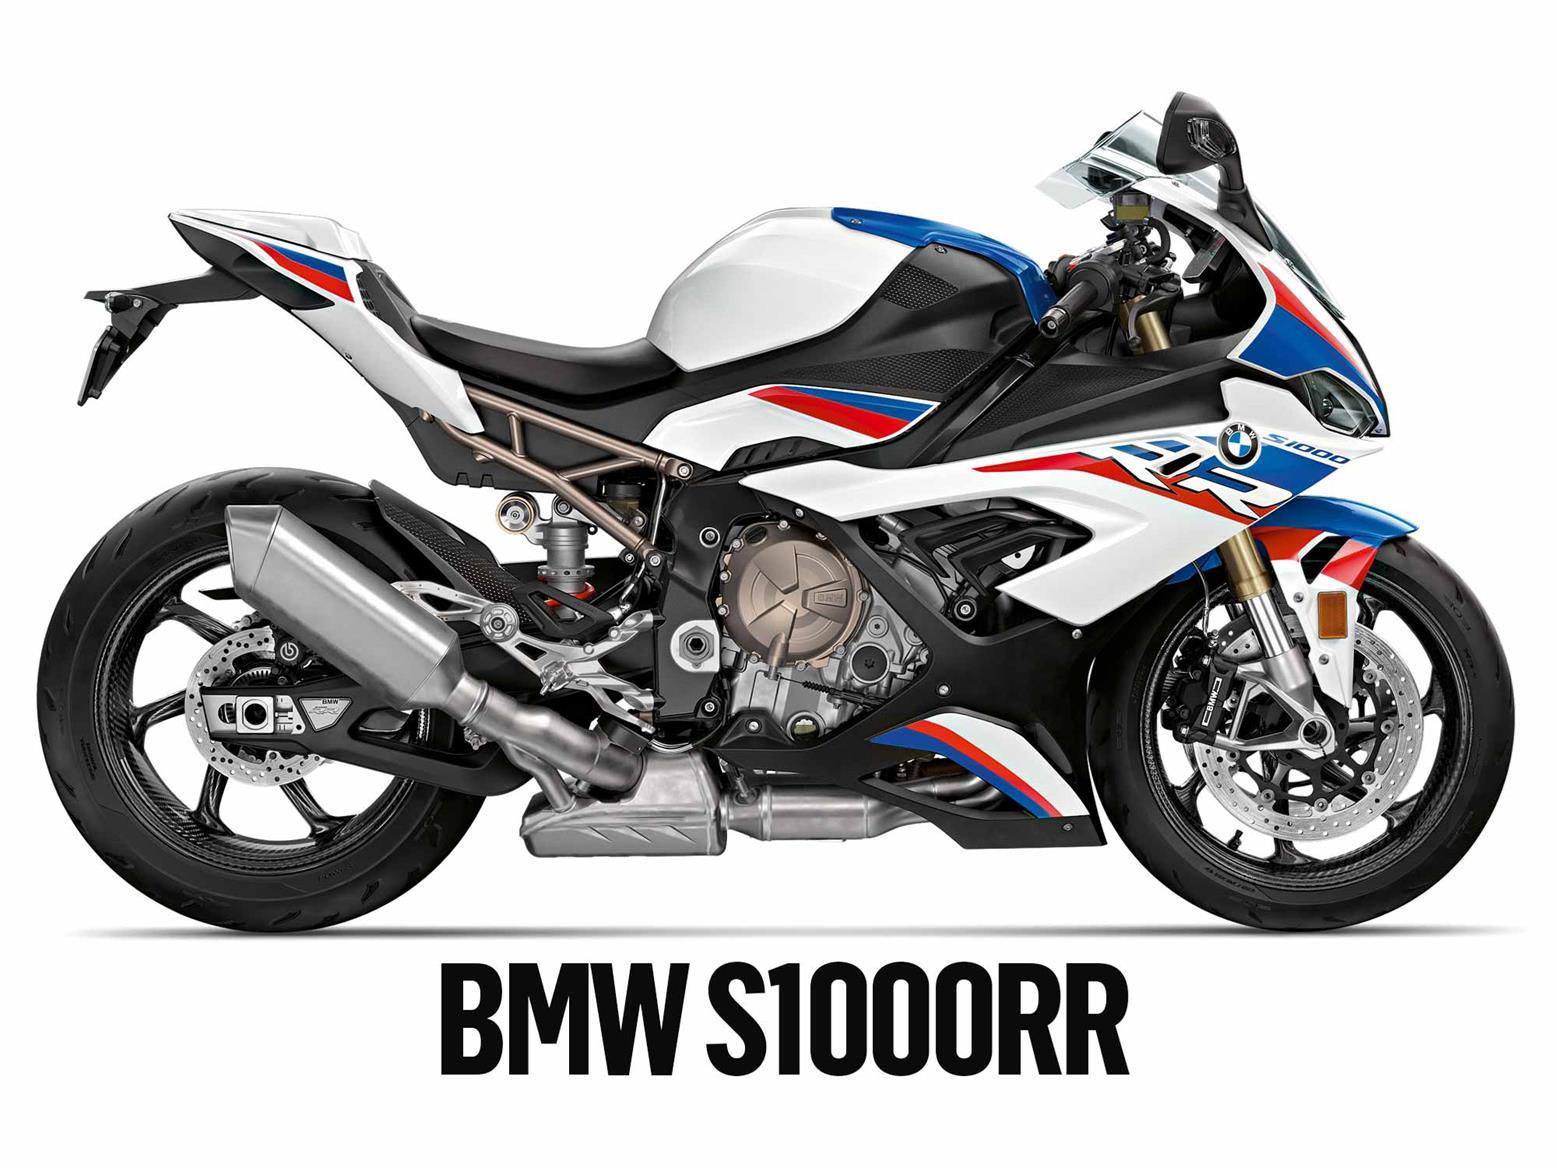 Read MCN's detailed BMW S1000RR long-term test review here